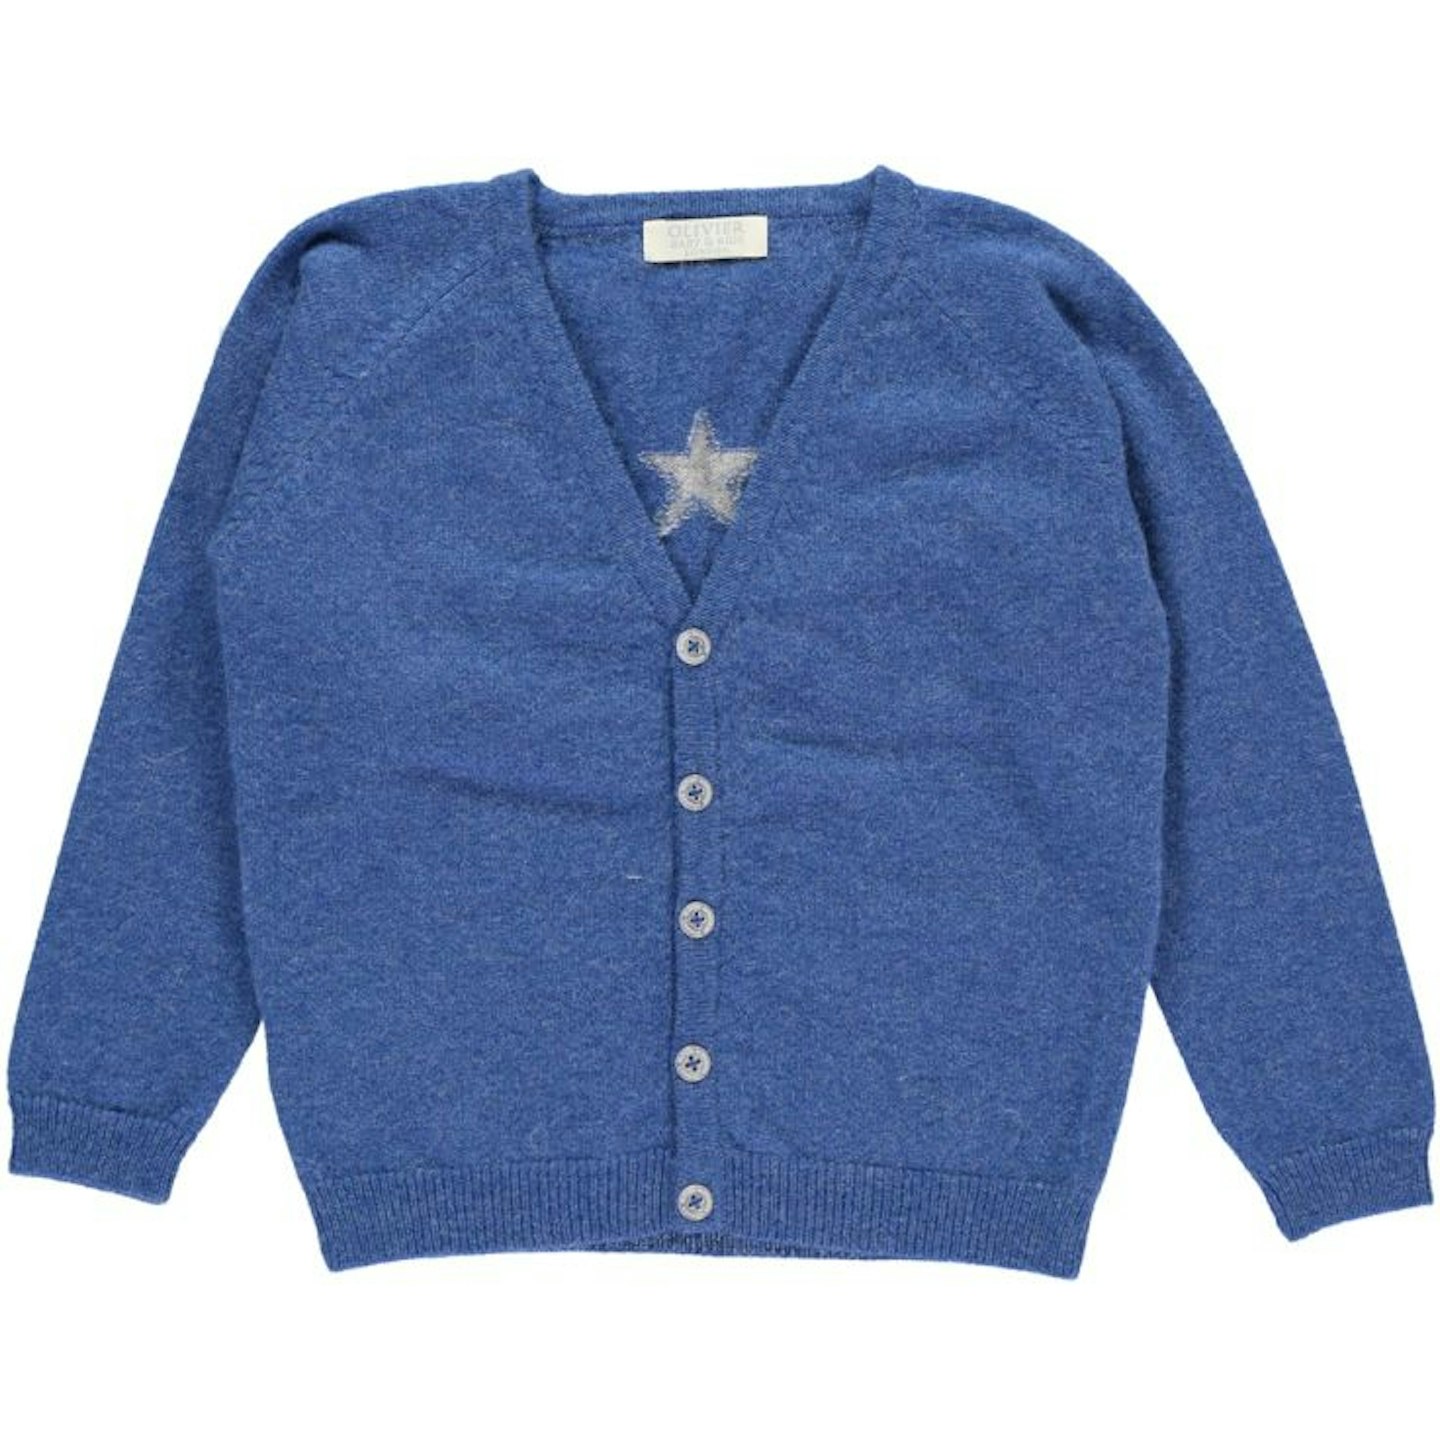 George Cardigan, from £64